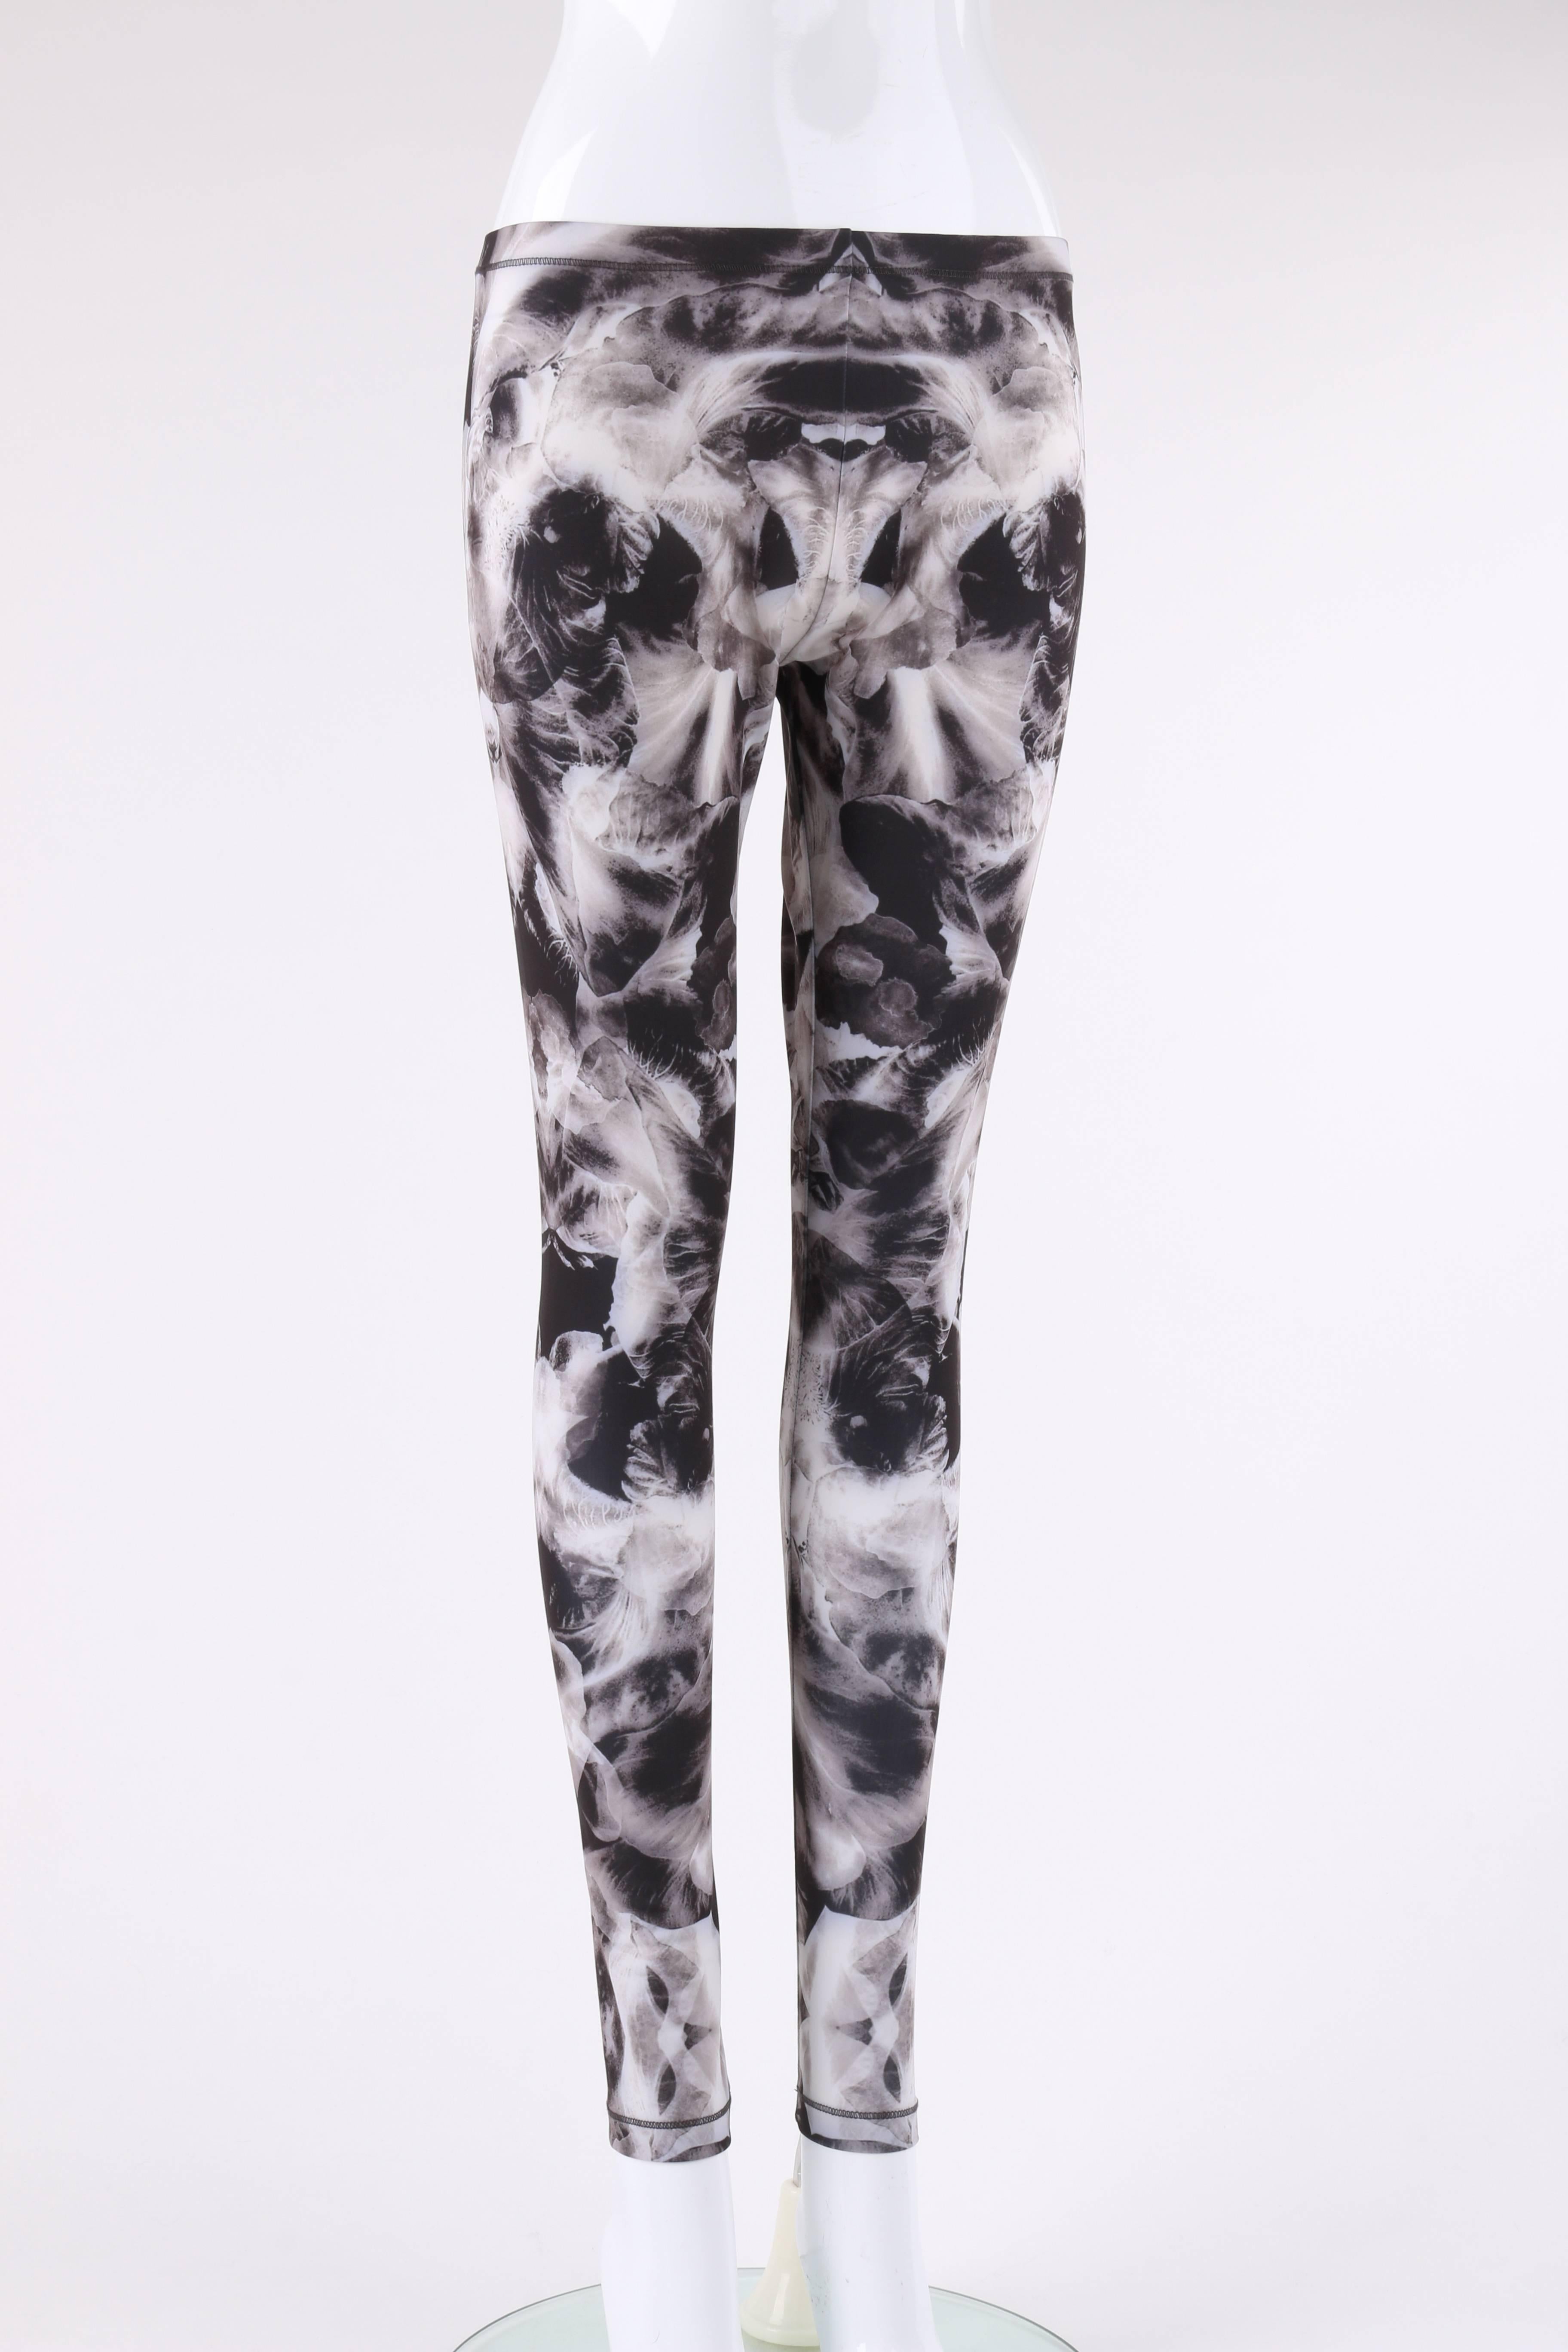 McQ by Alexander McQueen Spring/Summer 2013 mirrored Iris print leggings designed by Sarah Burton. All over mirrored Iris print in shades of gray. Elastic waistband. Slip-on style. Marked Fabric Content: 